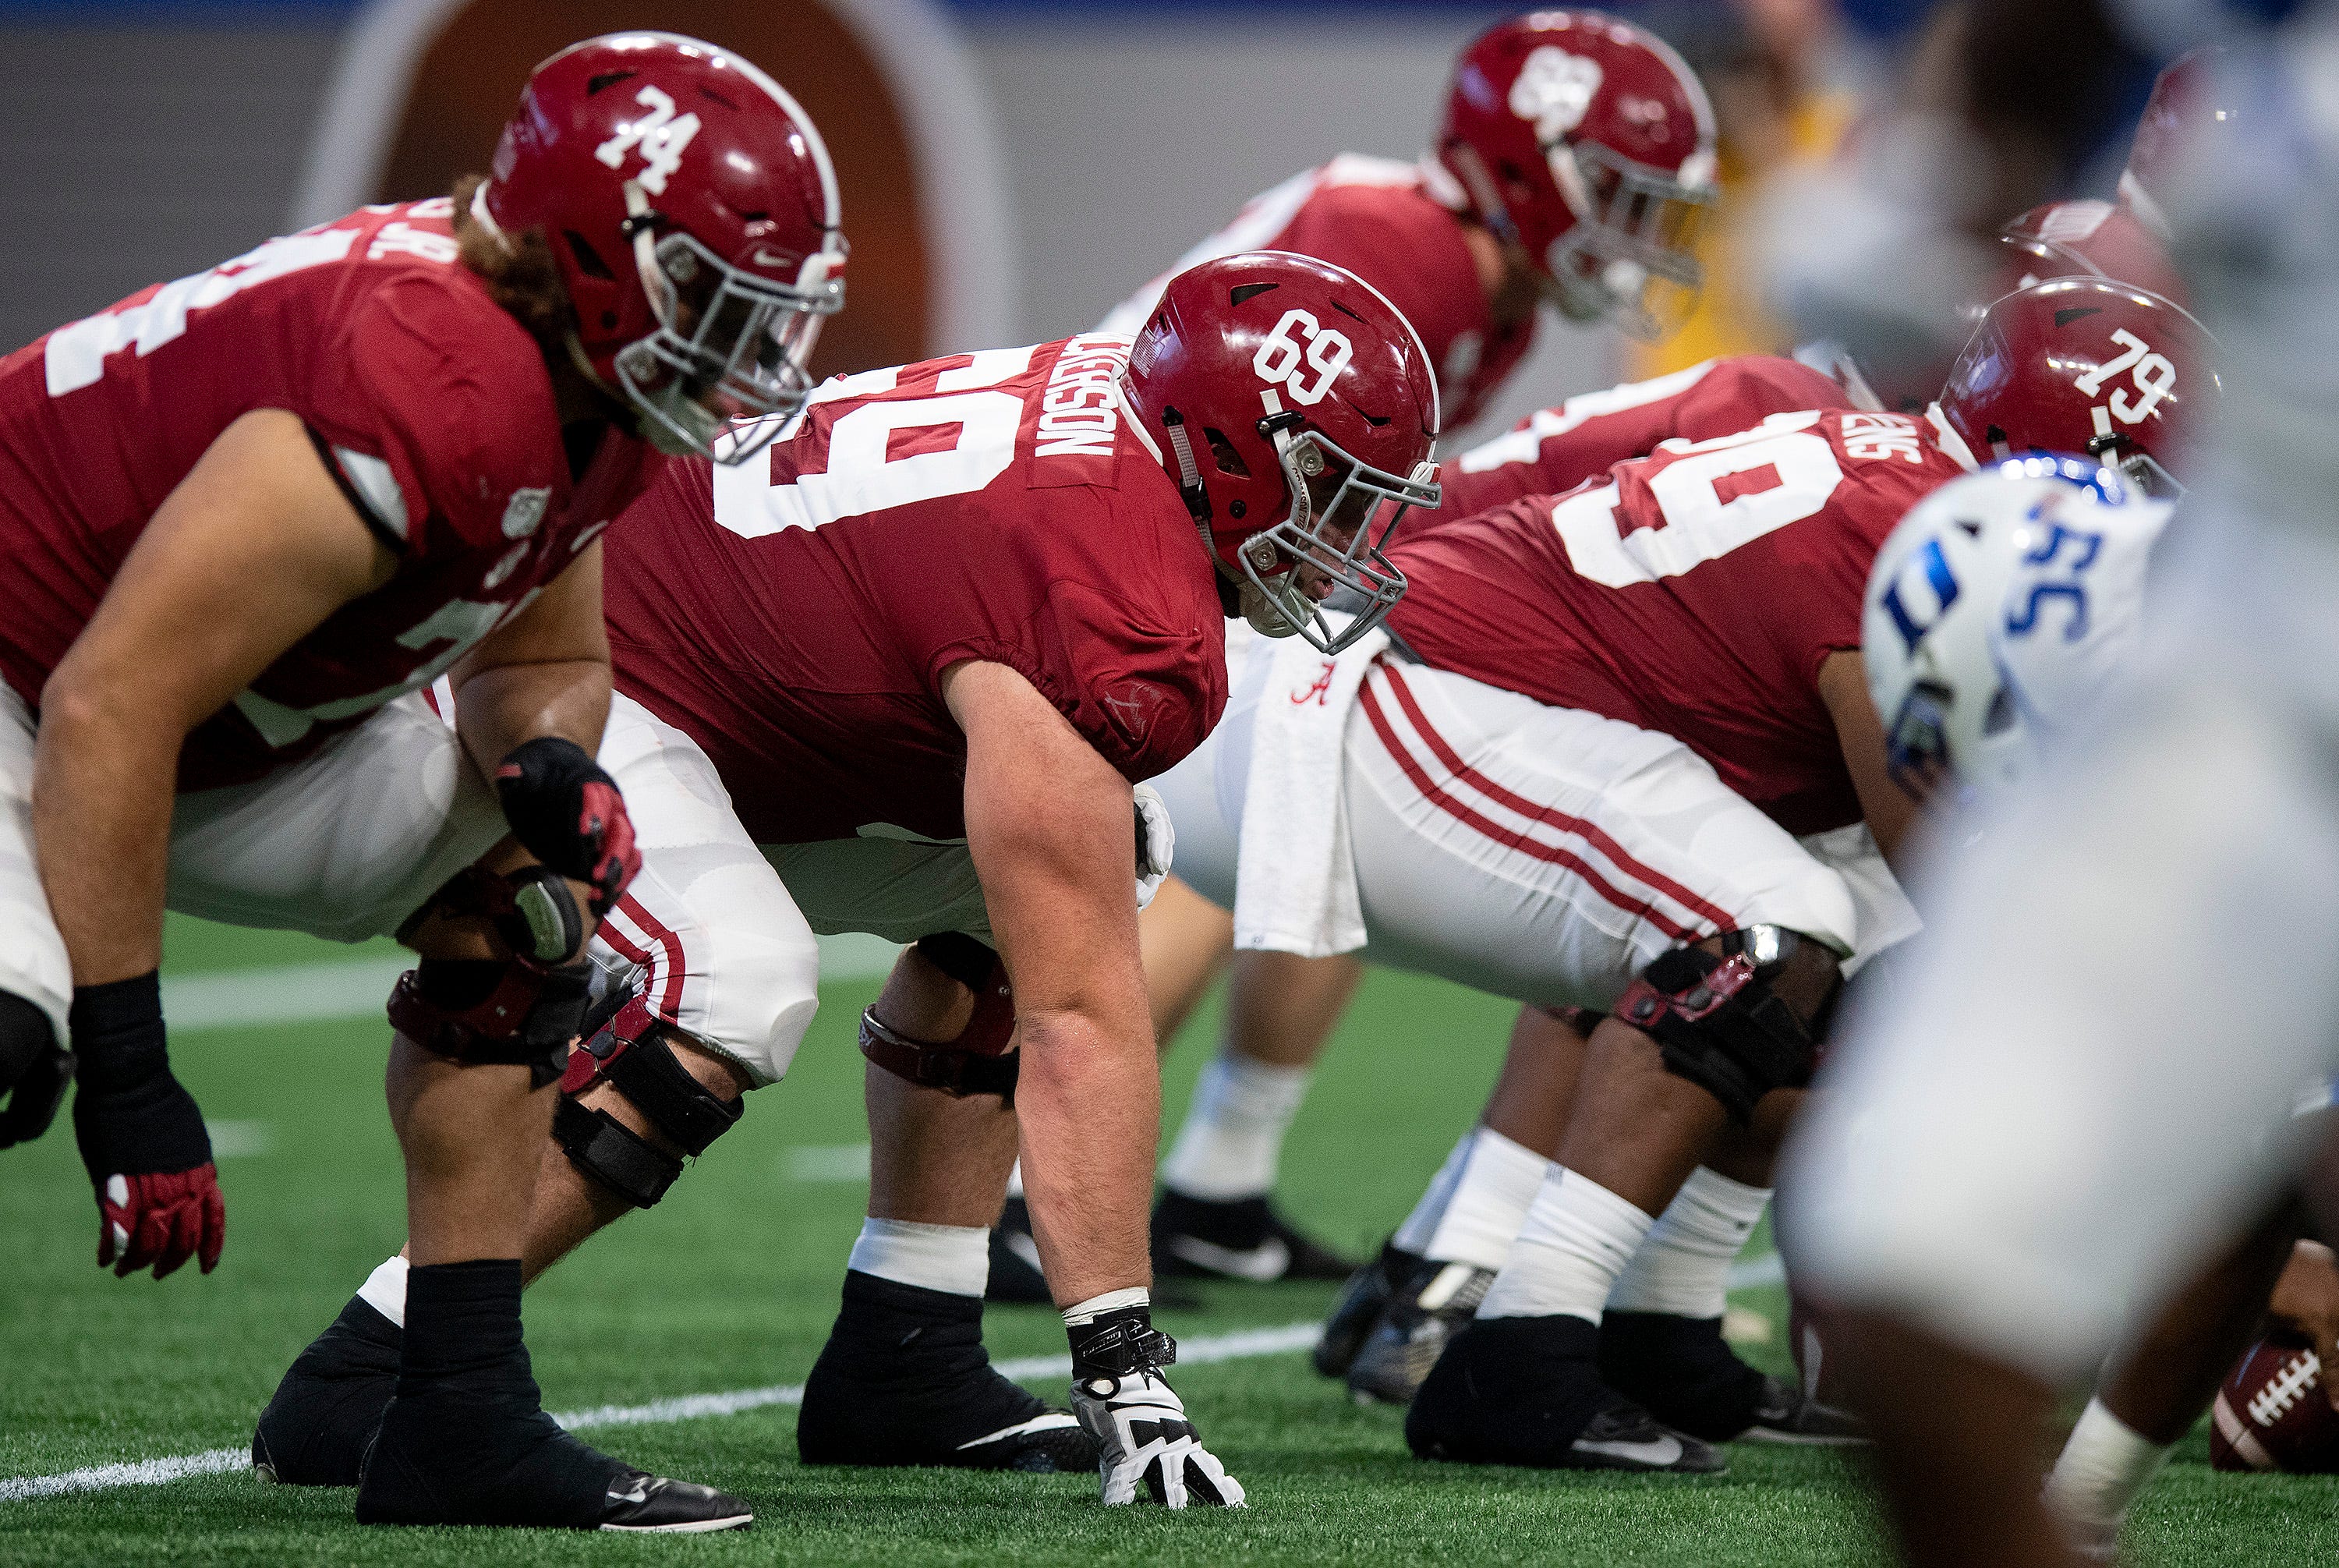 Alabama offensive lineman Landon Dickerson (69) against Duke in the Chick-fil-A Kickoff Game at Mercedes Benz Stadium in Atlanta, Ga., on Saturday August 31, 2019.